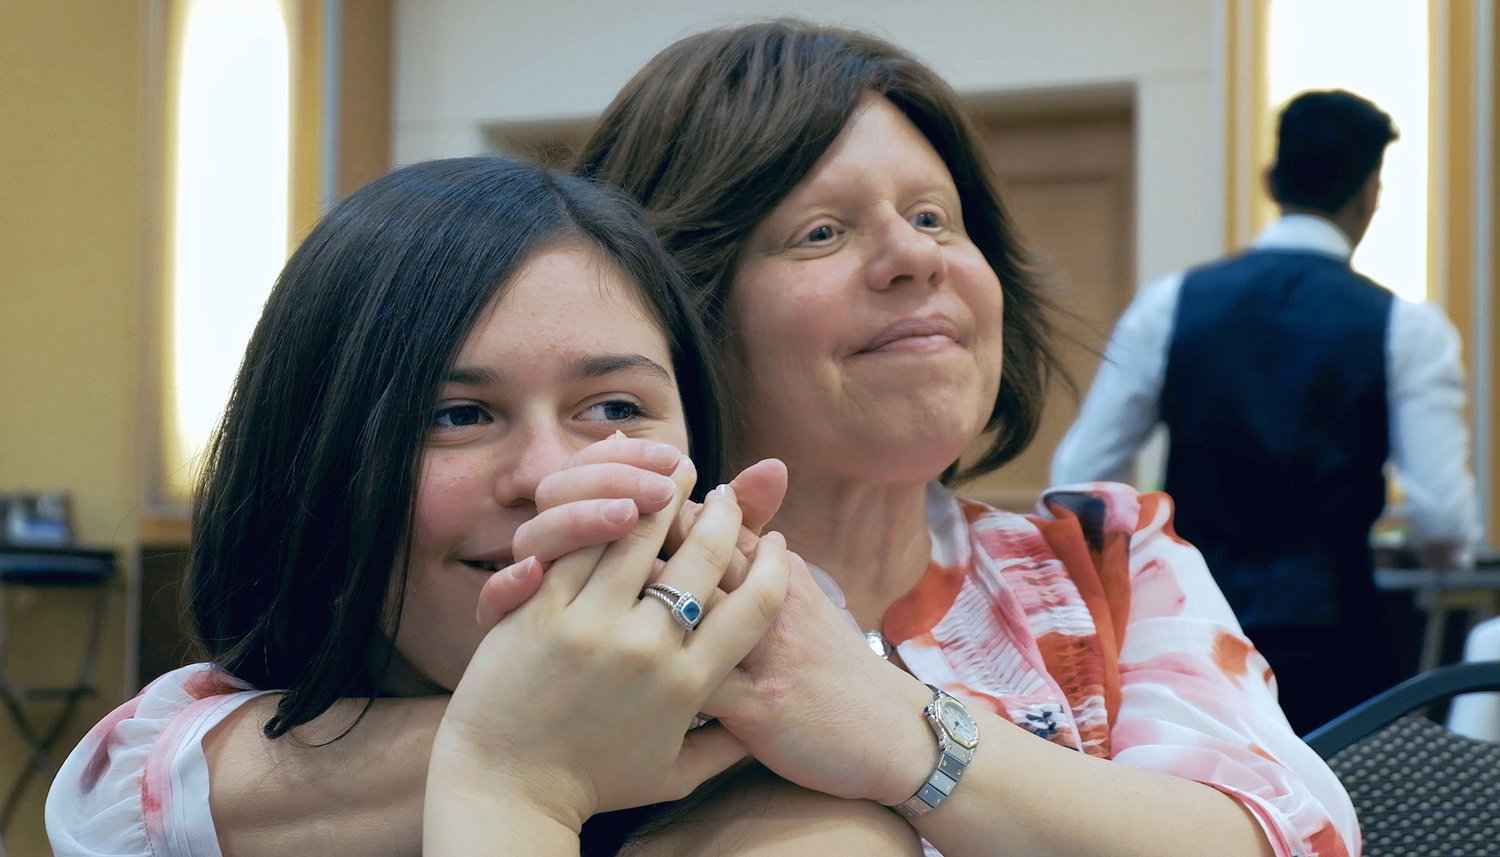 Merrick residents Tara Notrica, right, and her daughter, Samantha Horowitz, are the subjects of the documentary “Second Chance,” which details Notrica’s battle with mast cell disease and includes music that Horowitz wrote to help her mother overcome the challenges of her illness.